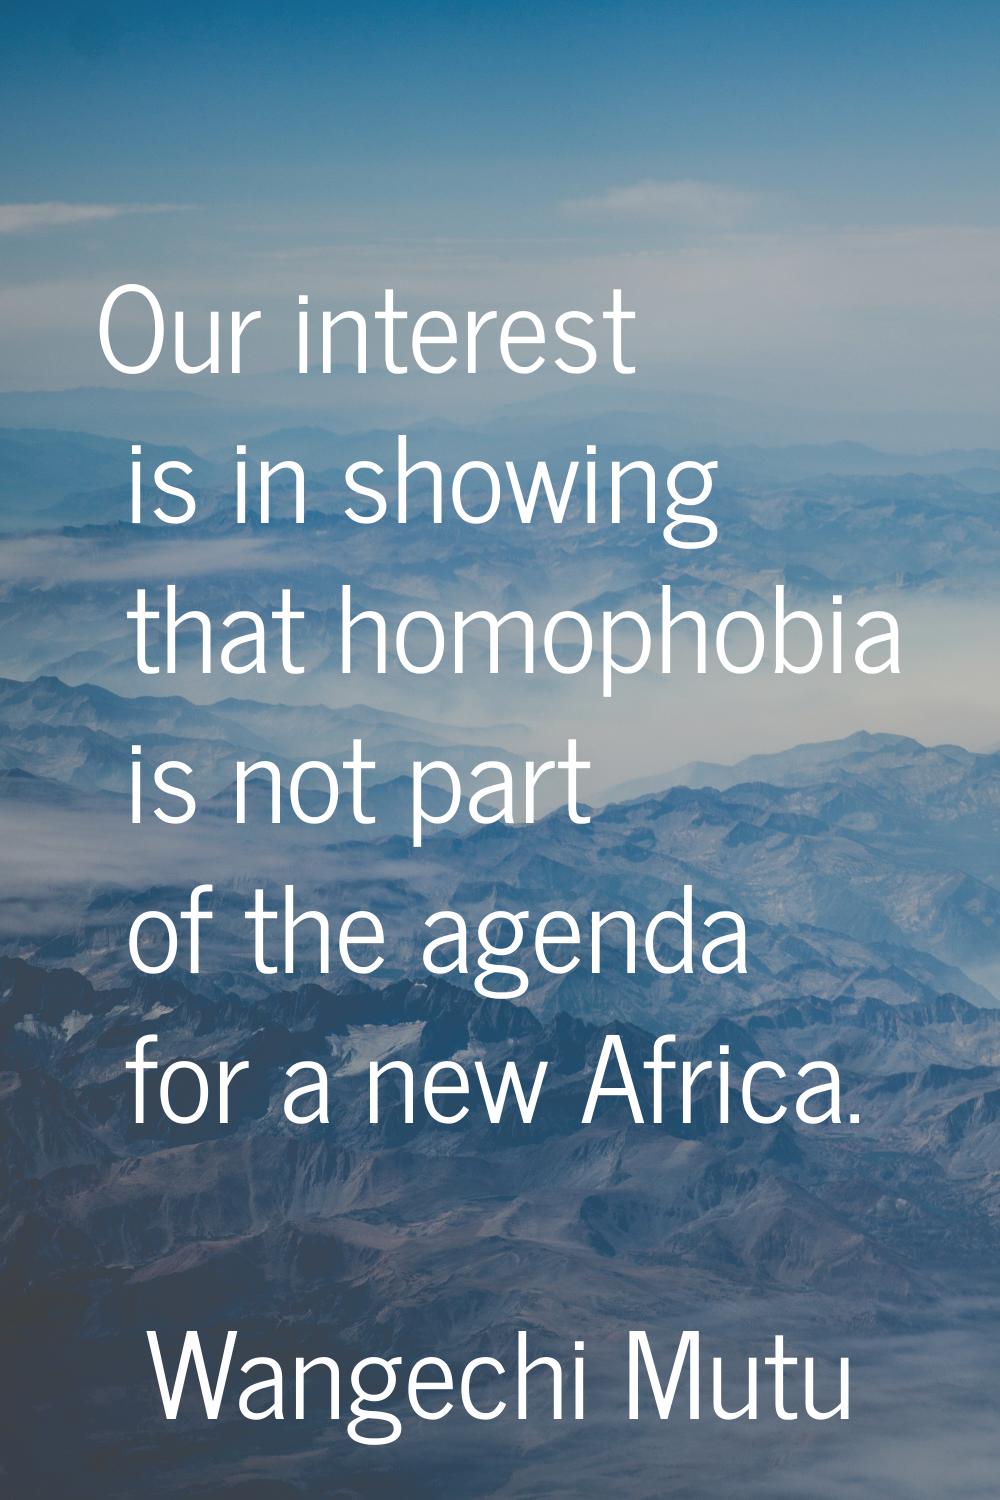 Our interest is in showing that homophobia is not part of the agenda for a new Africa.